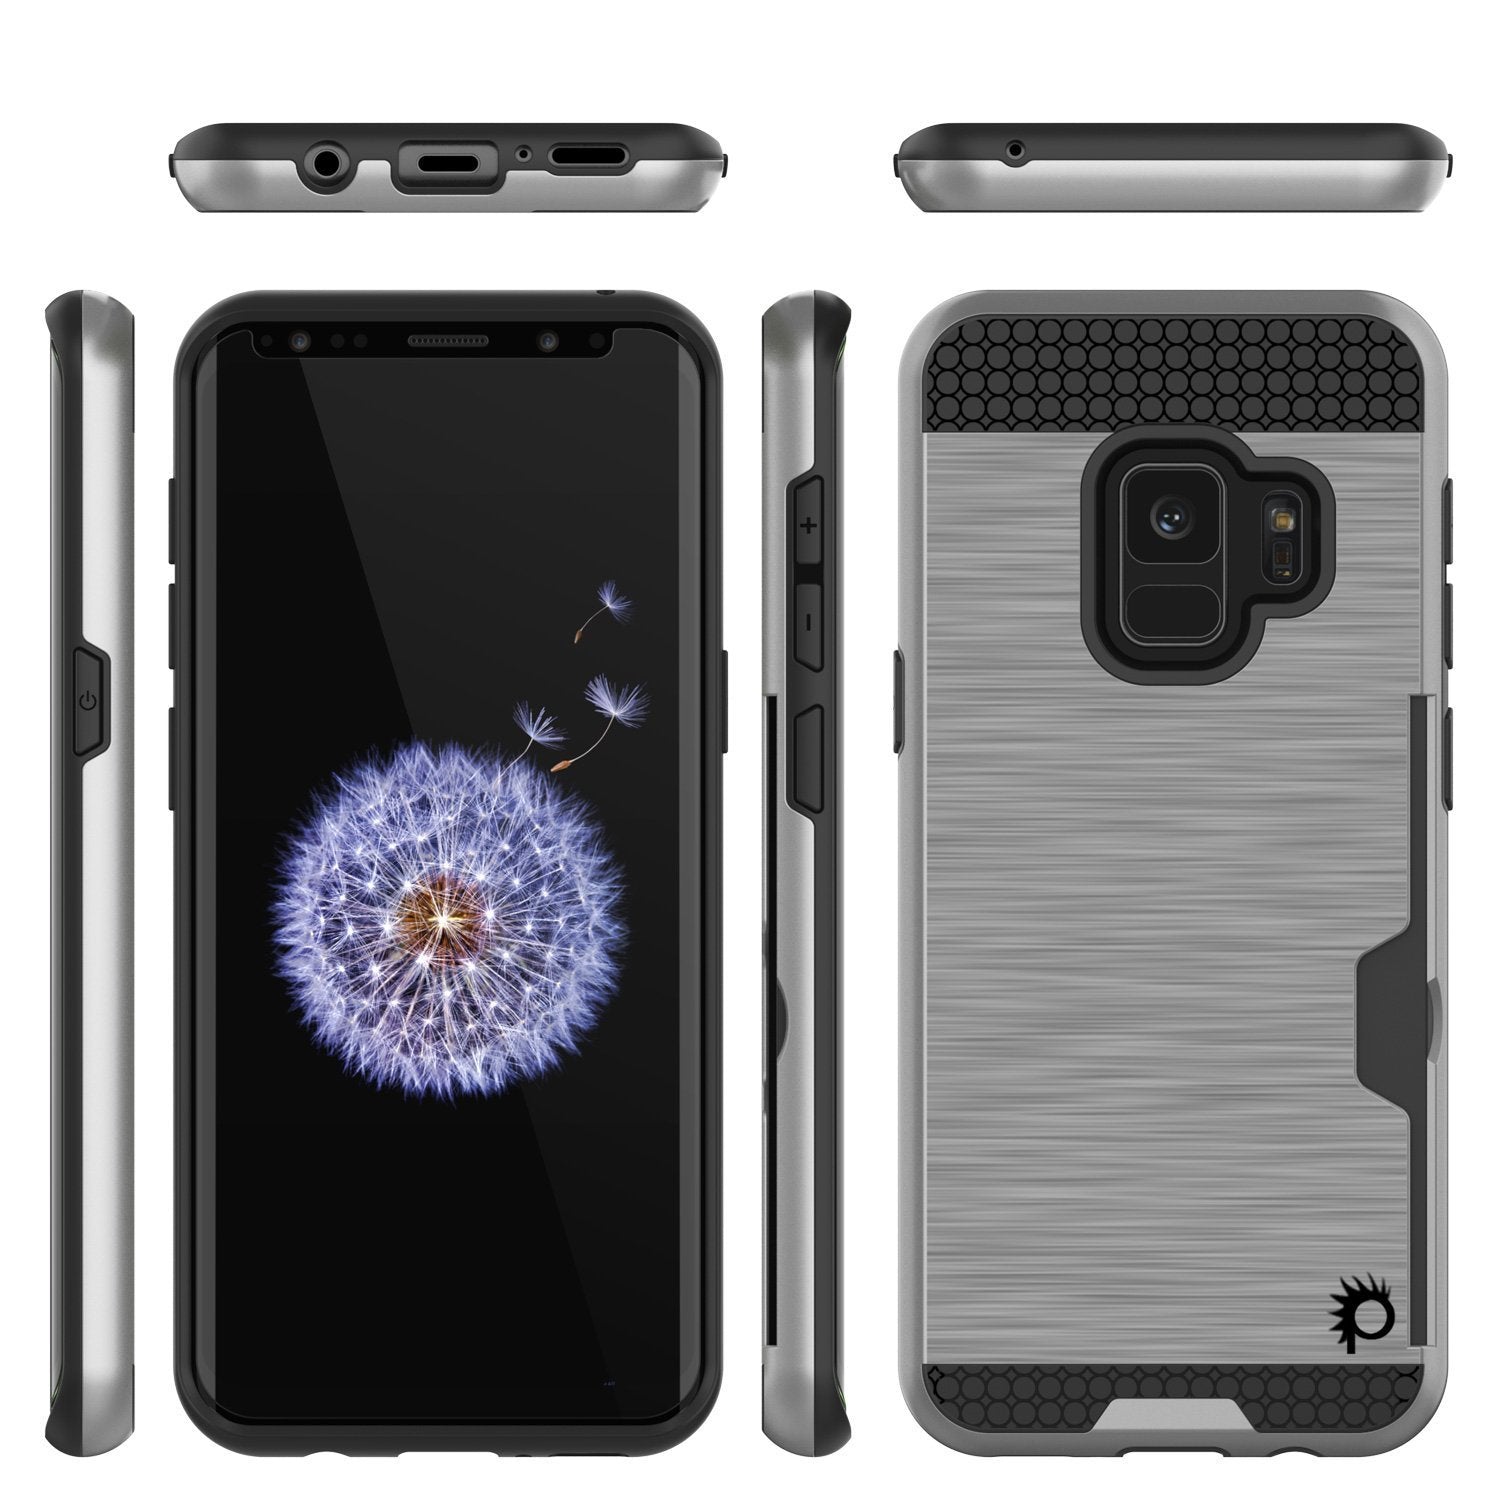 Galaxy S9 Case, PUNKcase [SLOT Series] [Slim Fit] Dual-Layer Armor Cover w/Integrated Anti-Shock System, Credit Card Slot [Silver] - PunkCase NZ